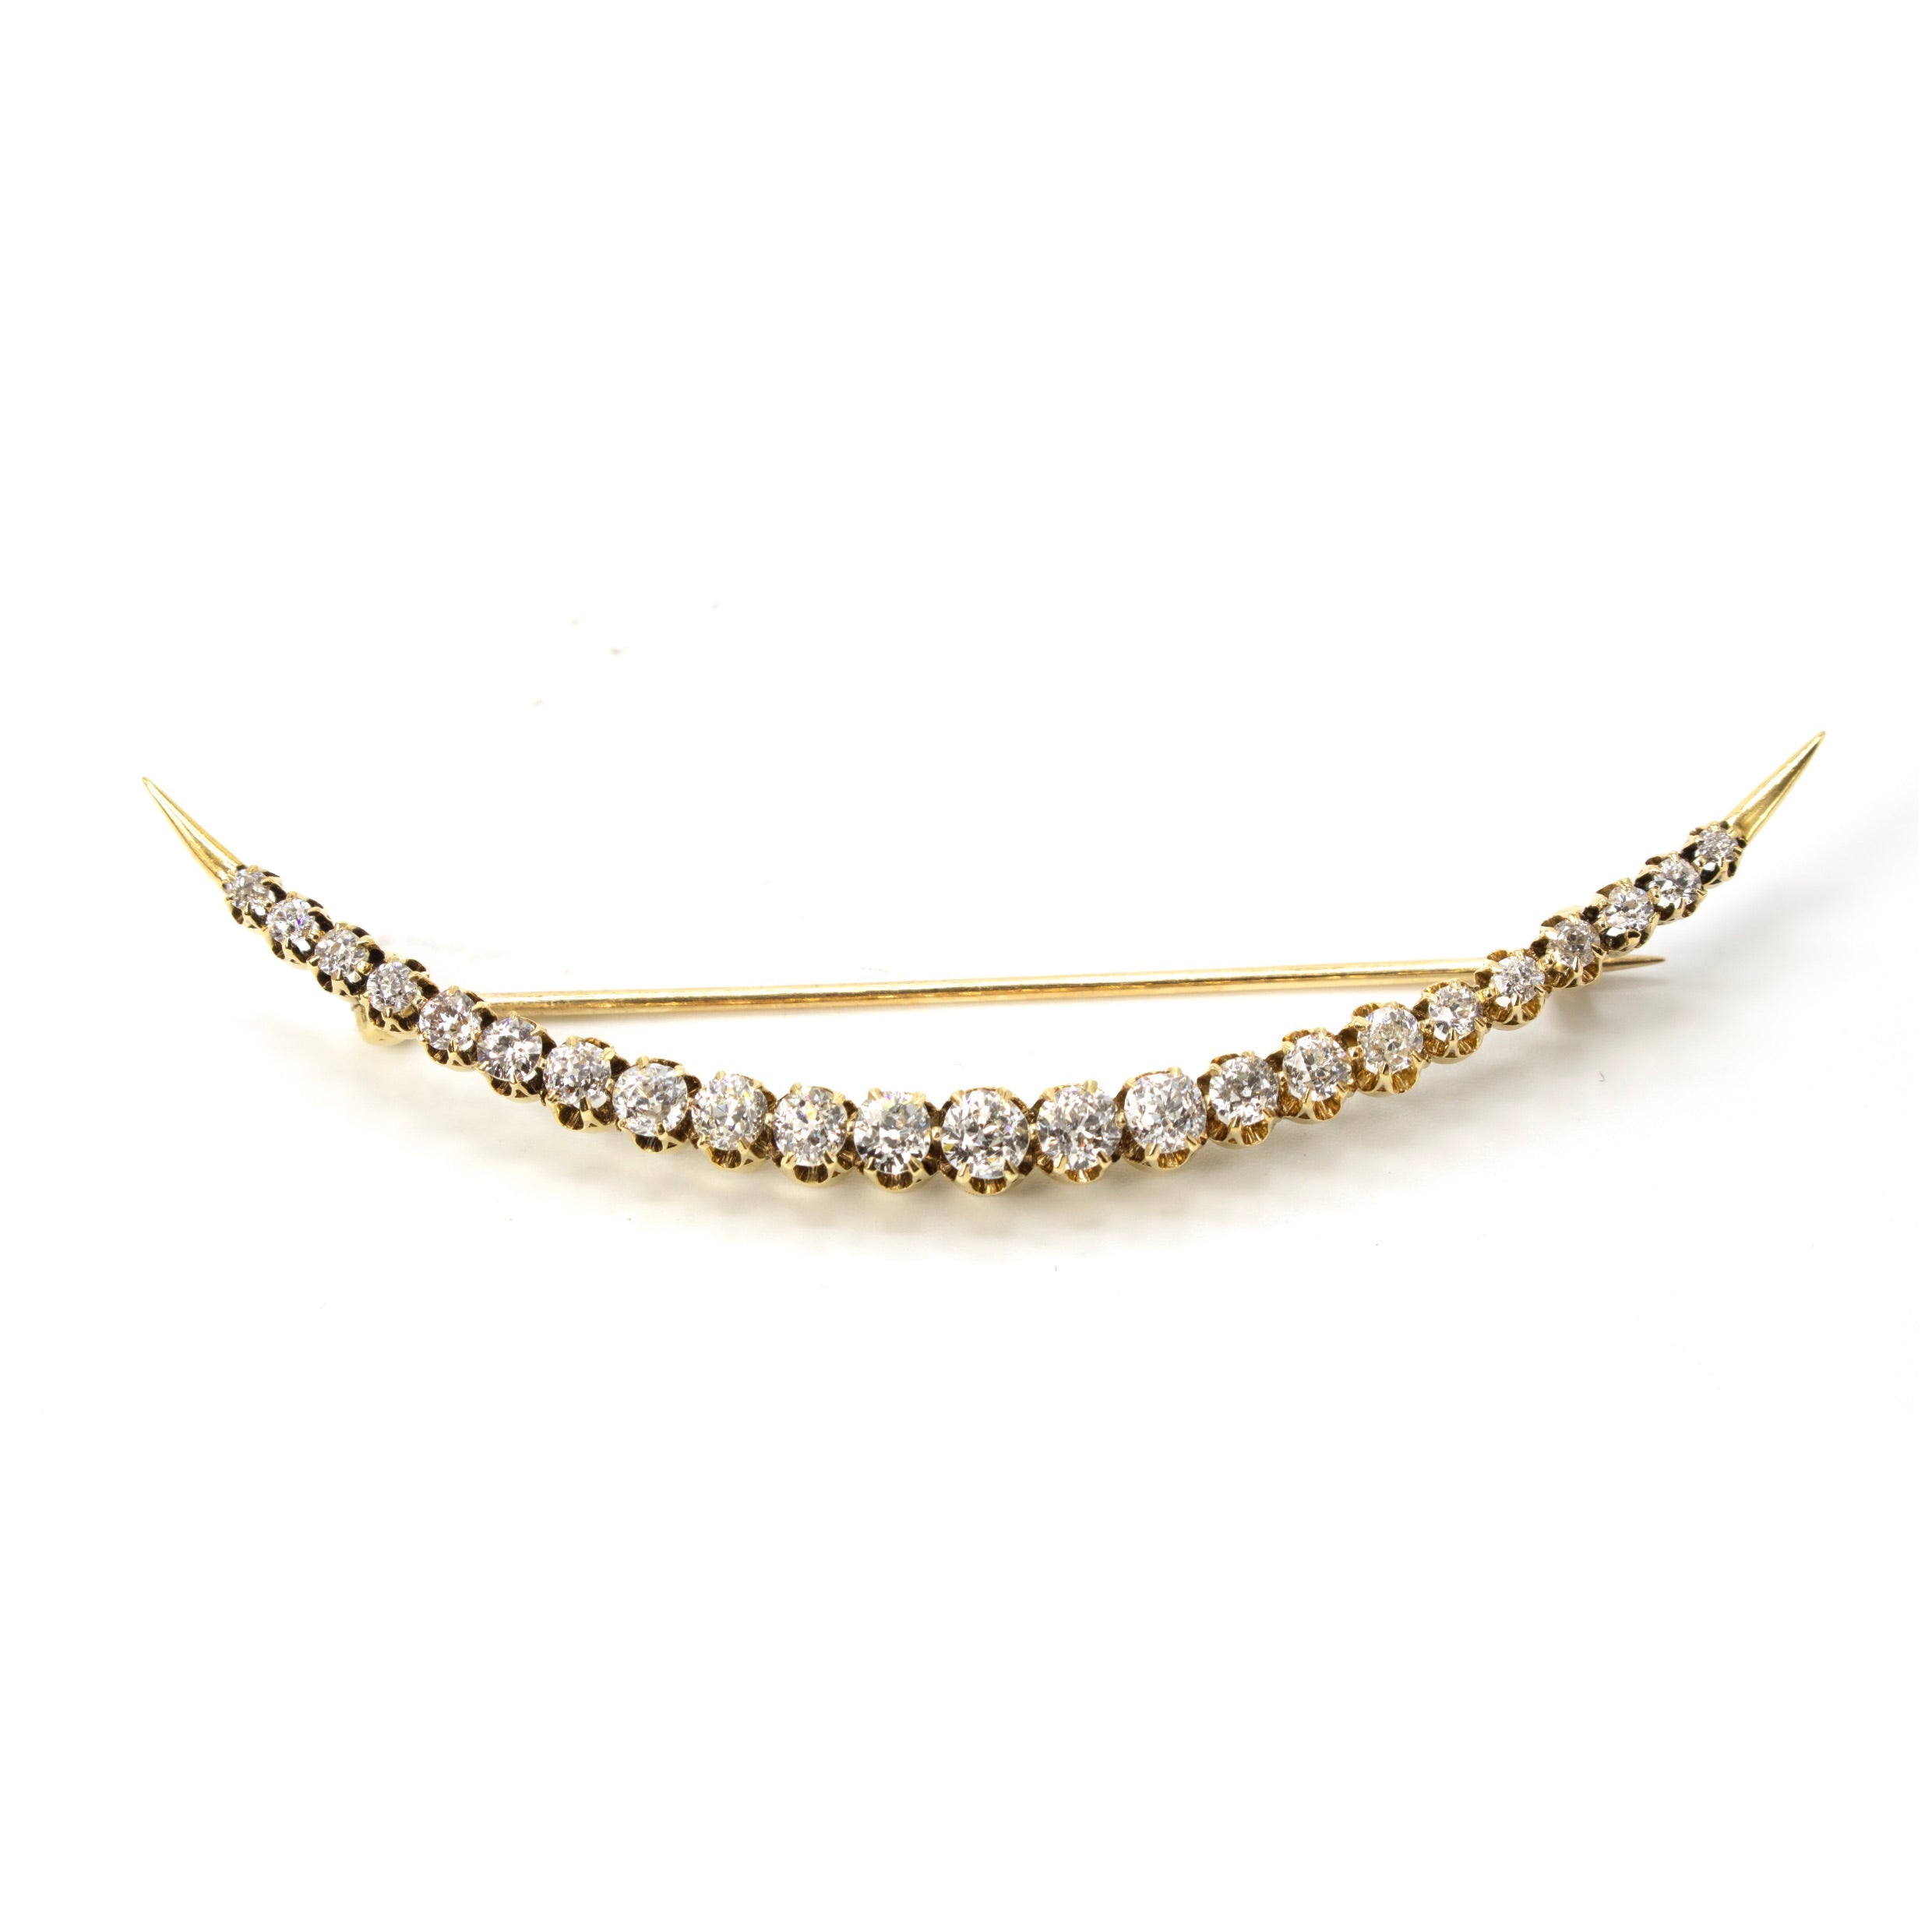 Antique Crescent Brooch Pin with Old Cut Diamonds in 18K Yellow Gold